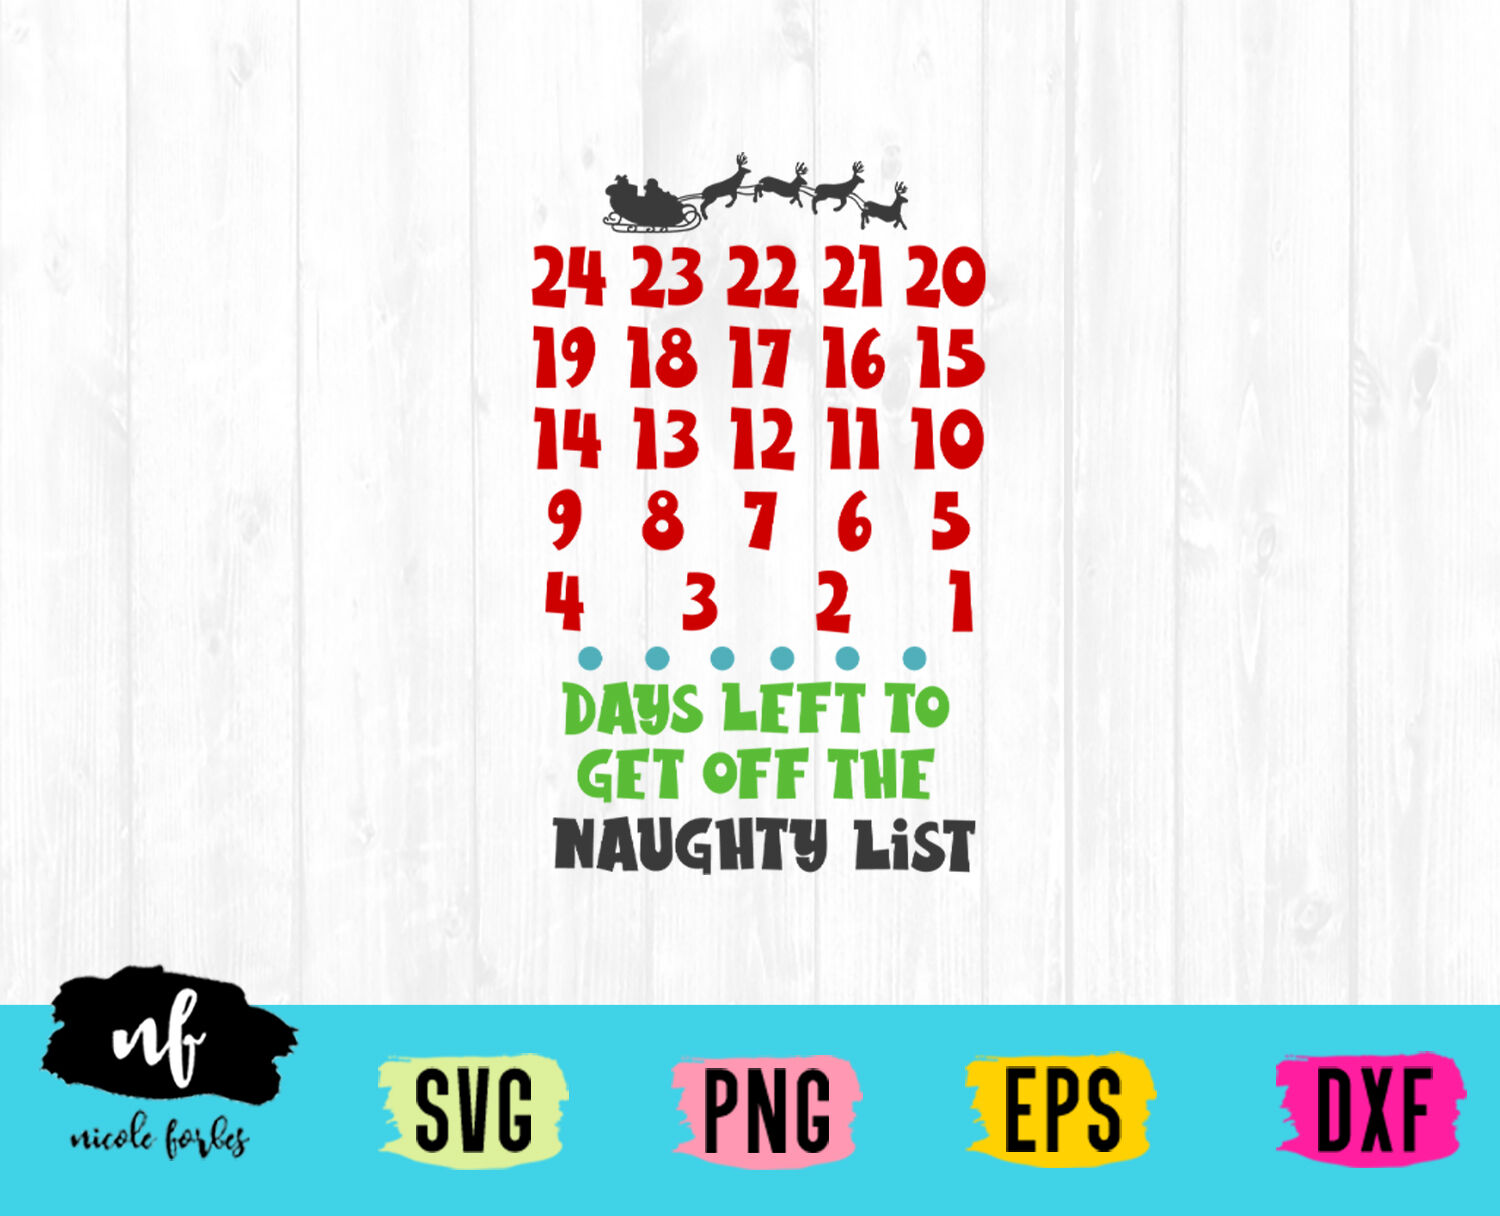 Christmas Countdown Svg Cut File By Nicole Forbes Designs Thehungryjpeg Com